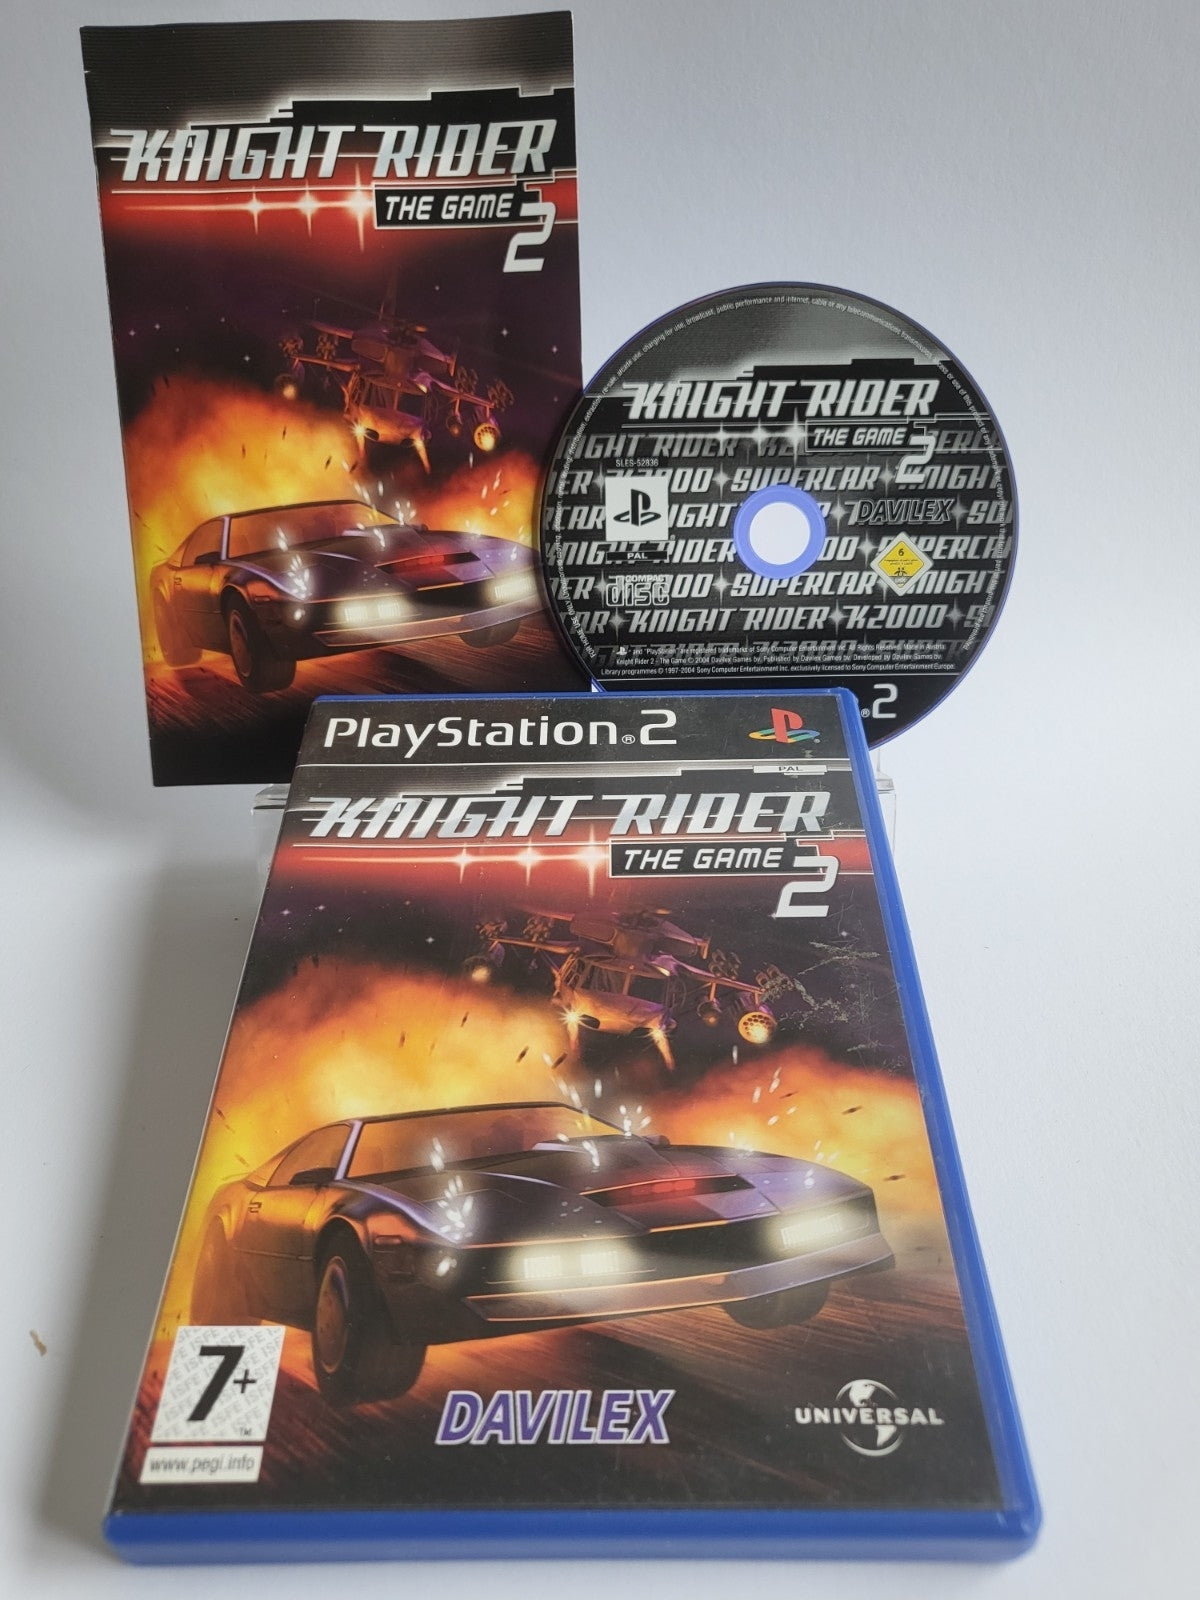 Knight Rider 2 - the Game Playstation 2